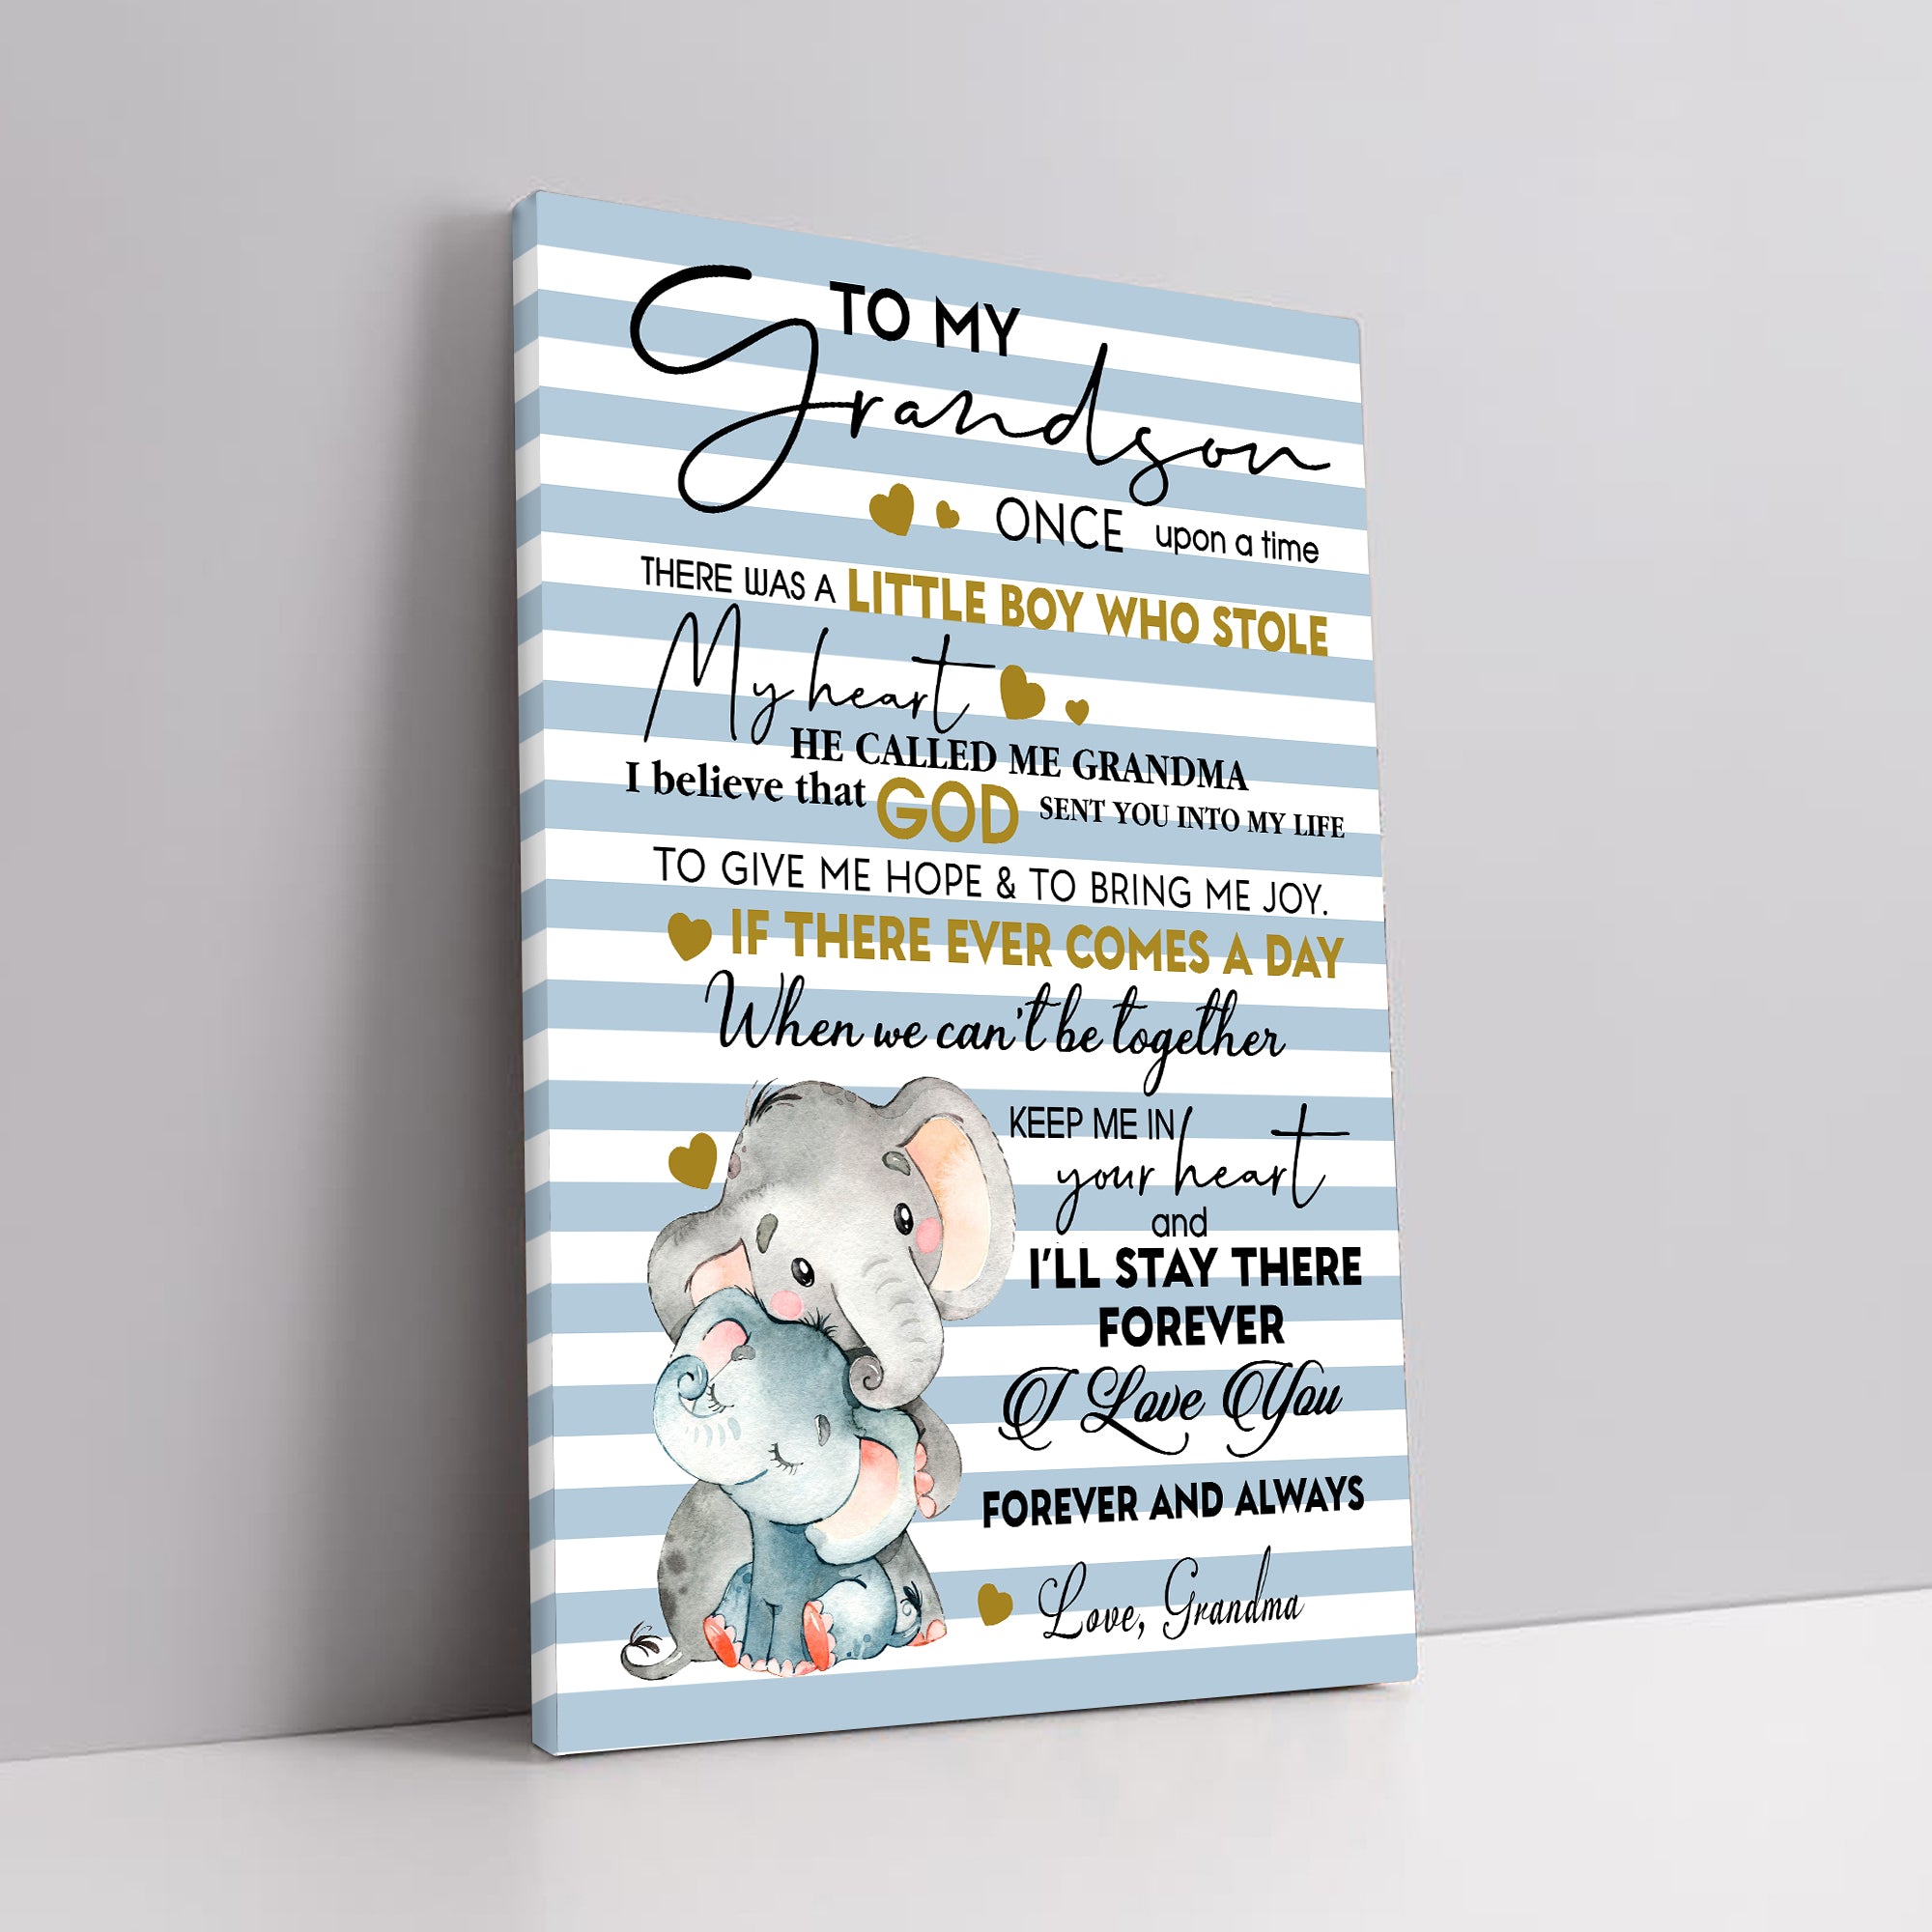 Elephant Canvas To Grandson From Grandma – Once Upon A Time There Was A Little Boy Who Stole My Heart